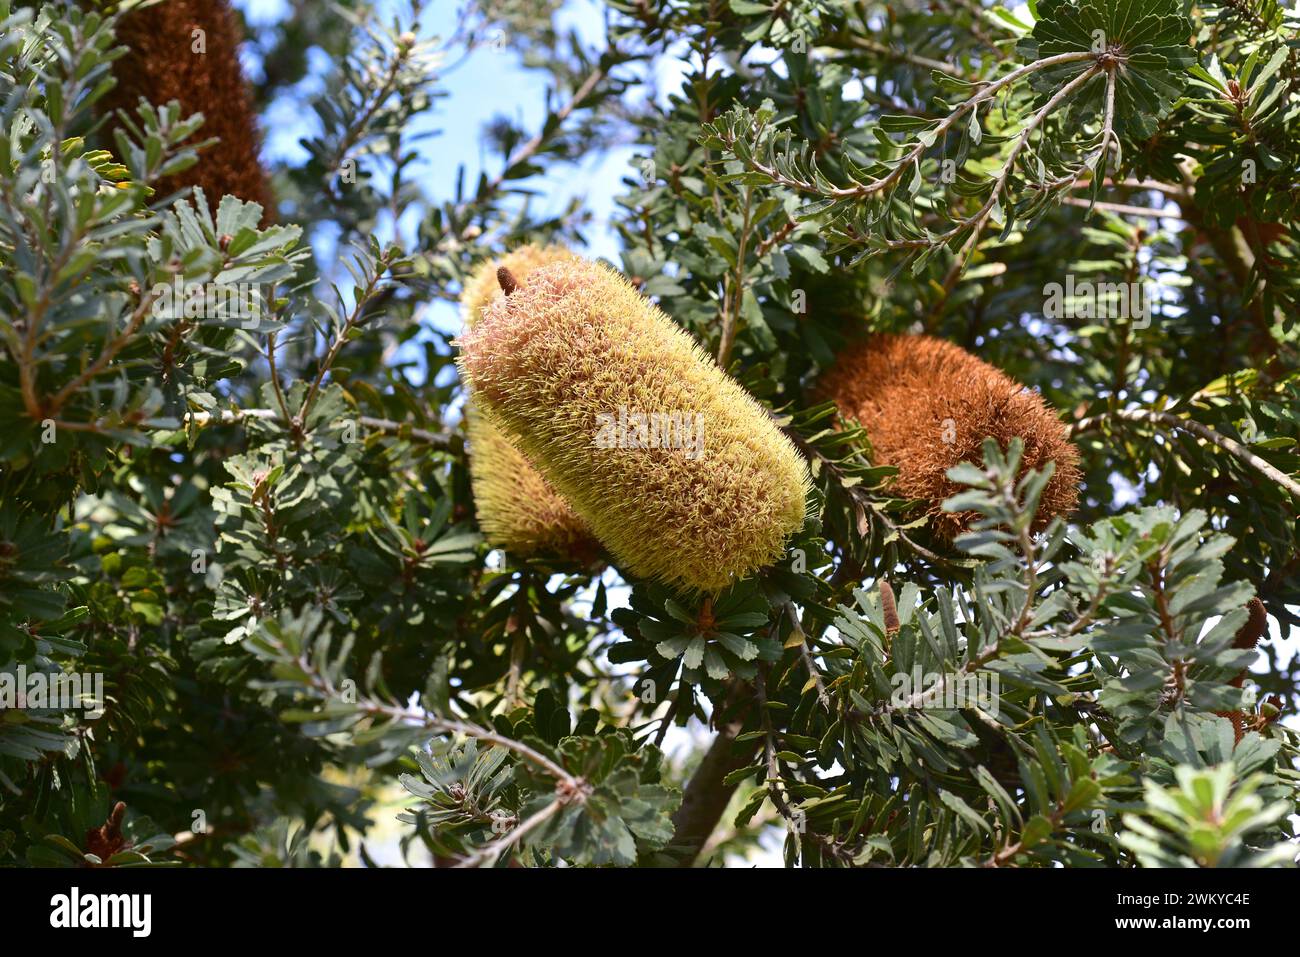 Cut-leaf banksia (Banksia praemorsa) is a small tree endemic to southwestern Austalia. Inflorescence and leaves. Stock Photo